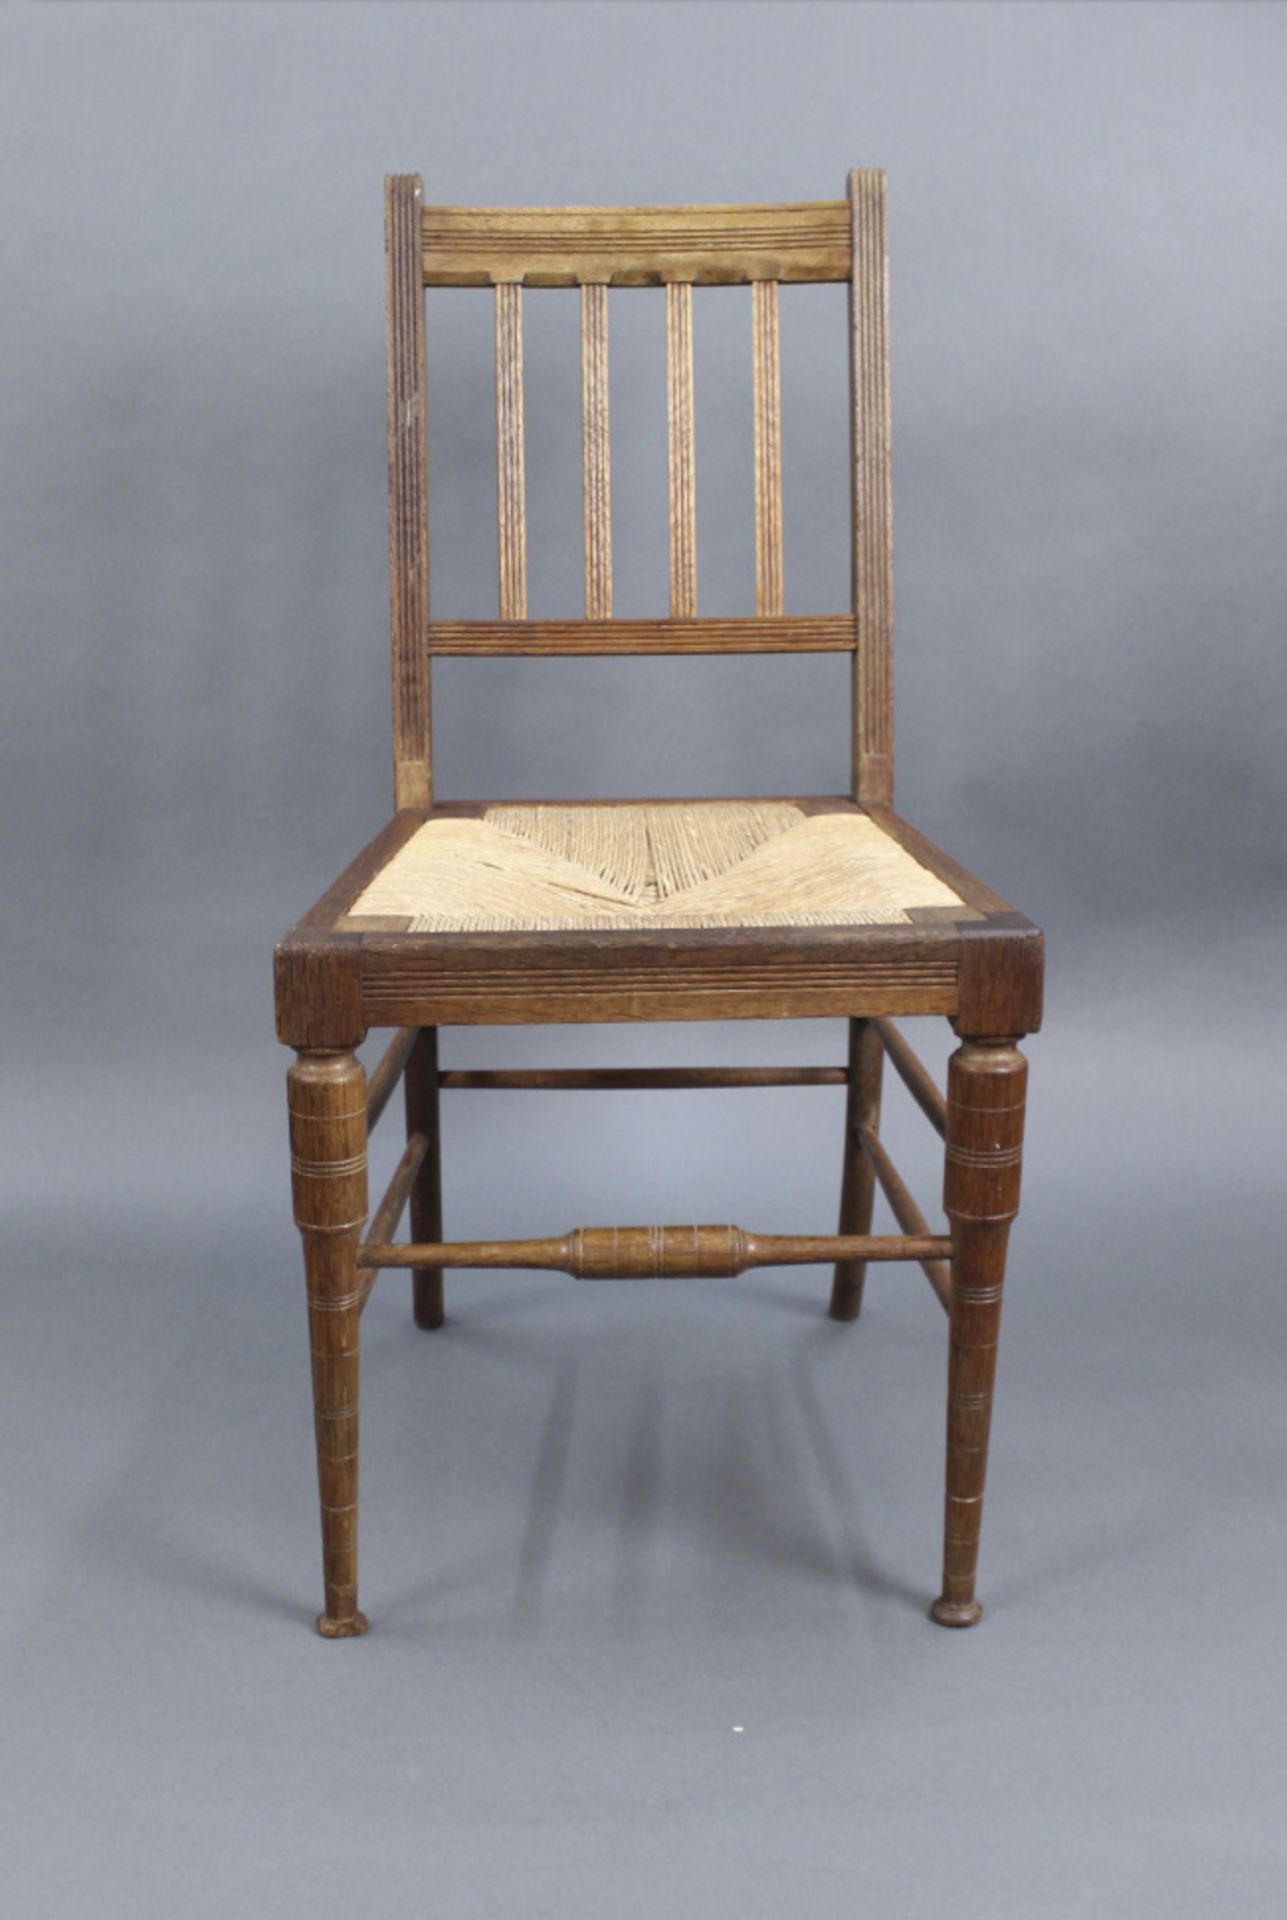 Edwardian Beech Occasional Chair with Rush Seat - Image 2 of 5